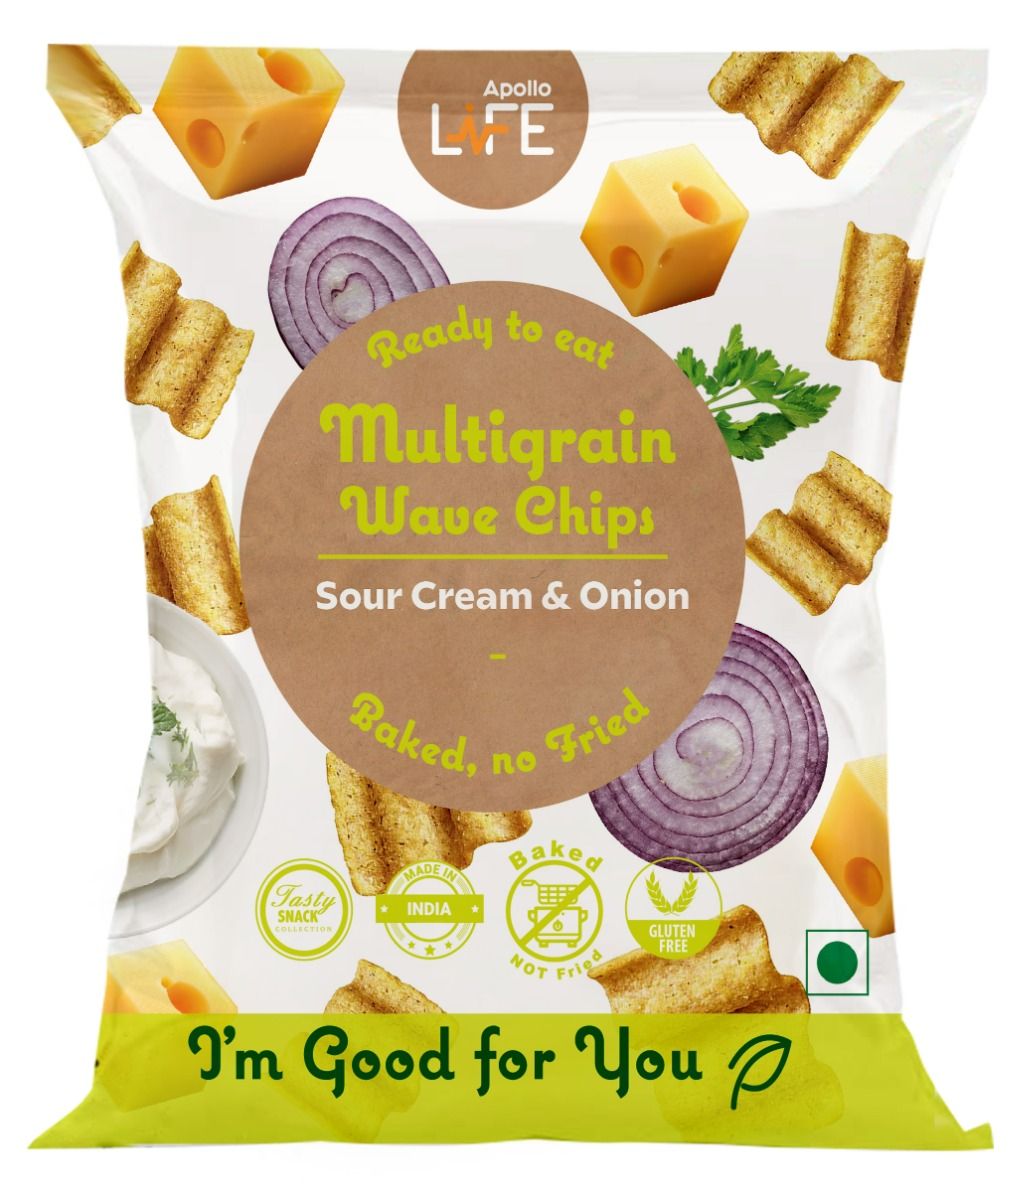 Buy Apollo Life Multigrain Wave Chips with Sour Cream & Onion, 30 gm Online